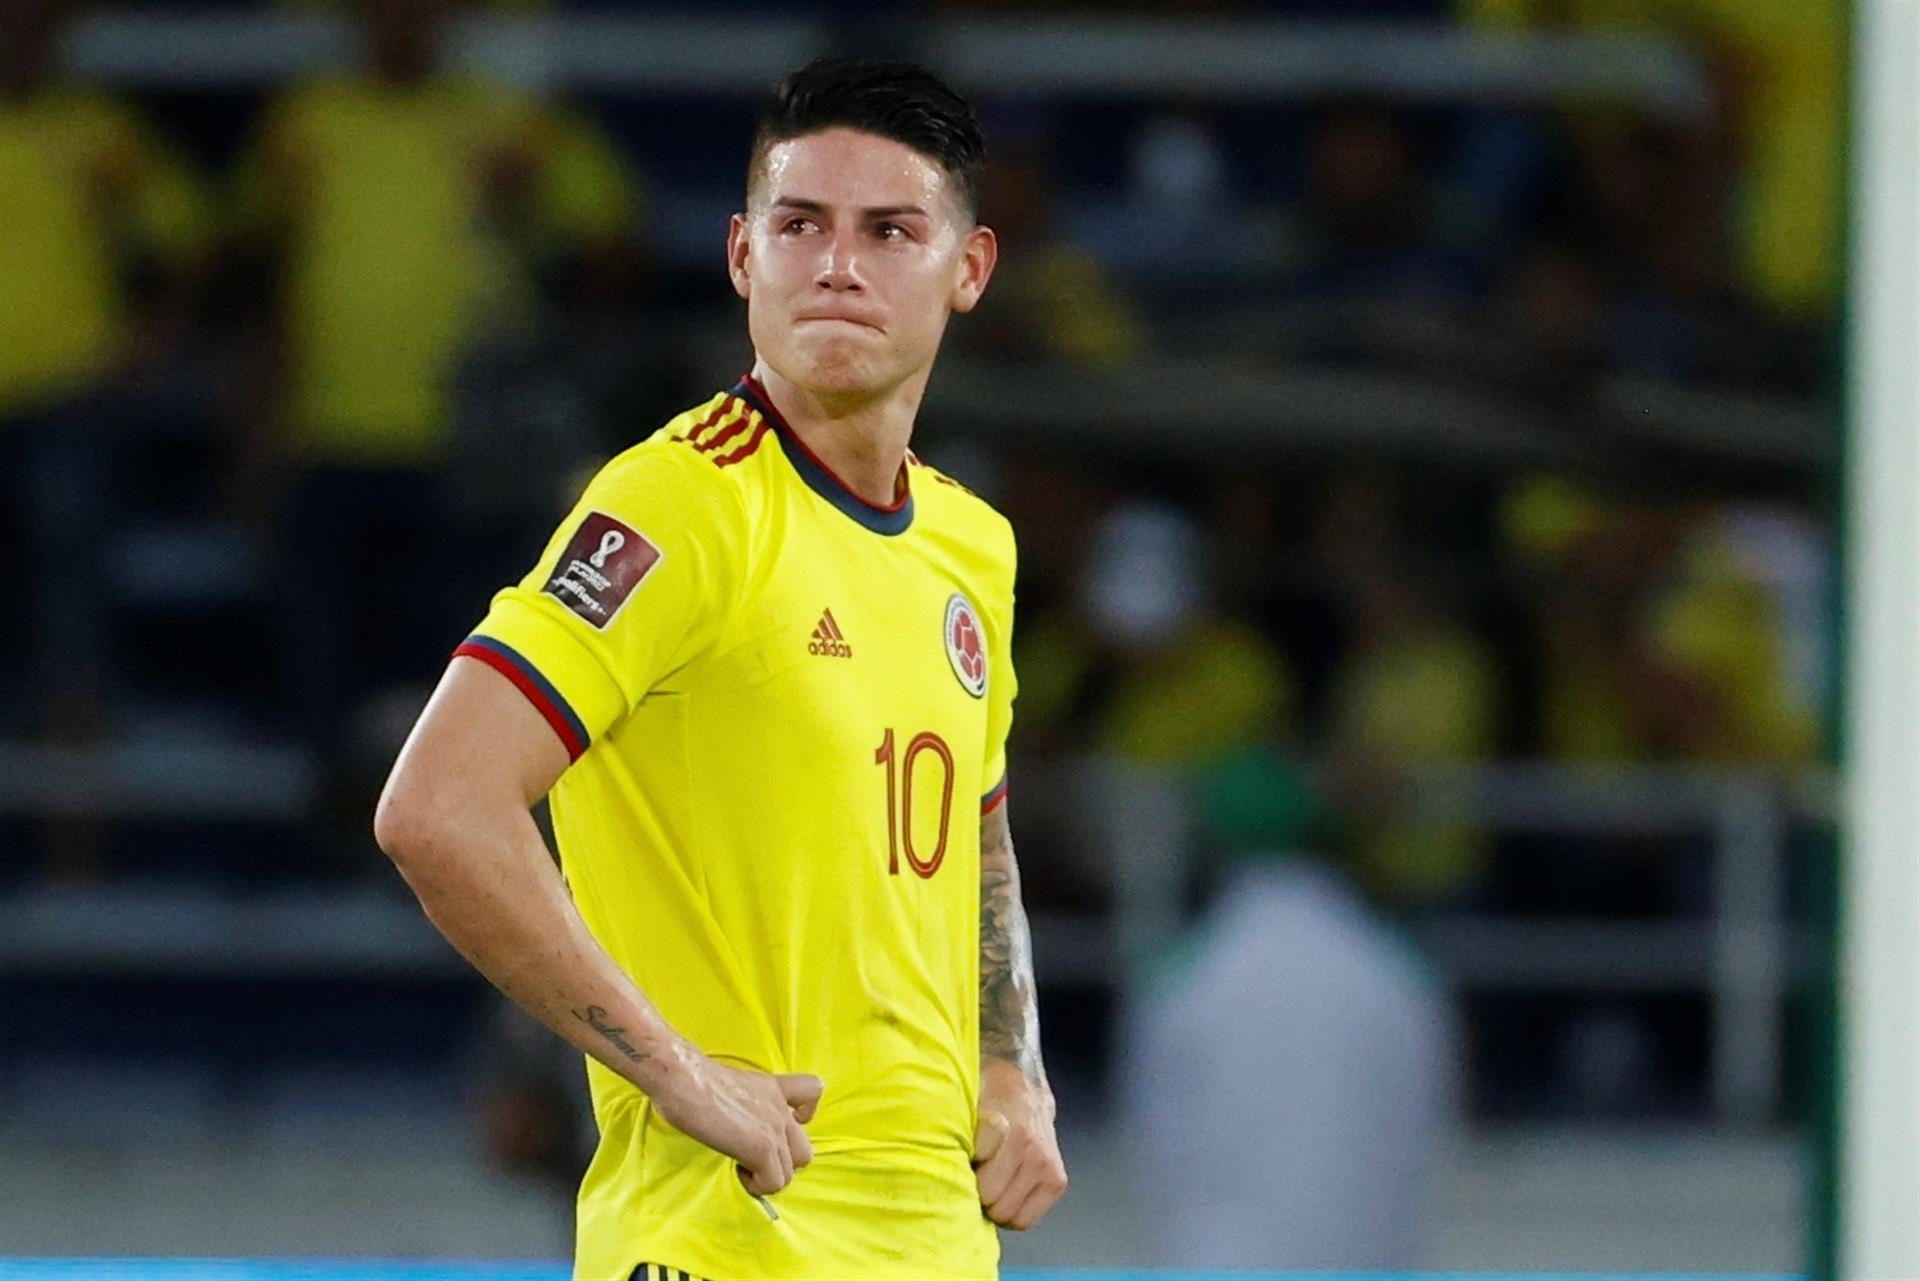 James moves closer to Olympiakos and away from Galatasaray